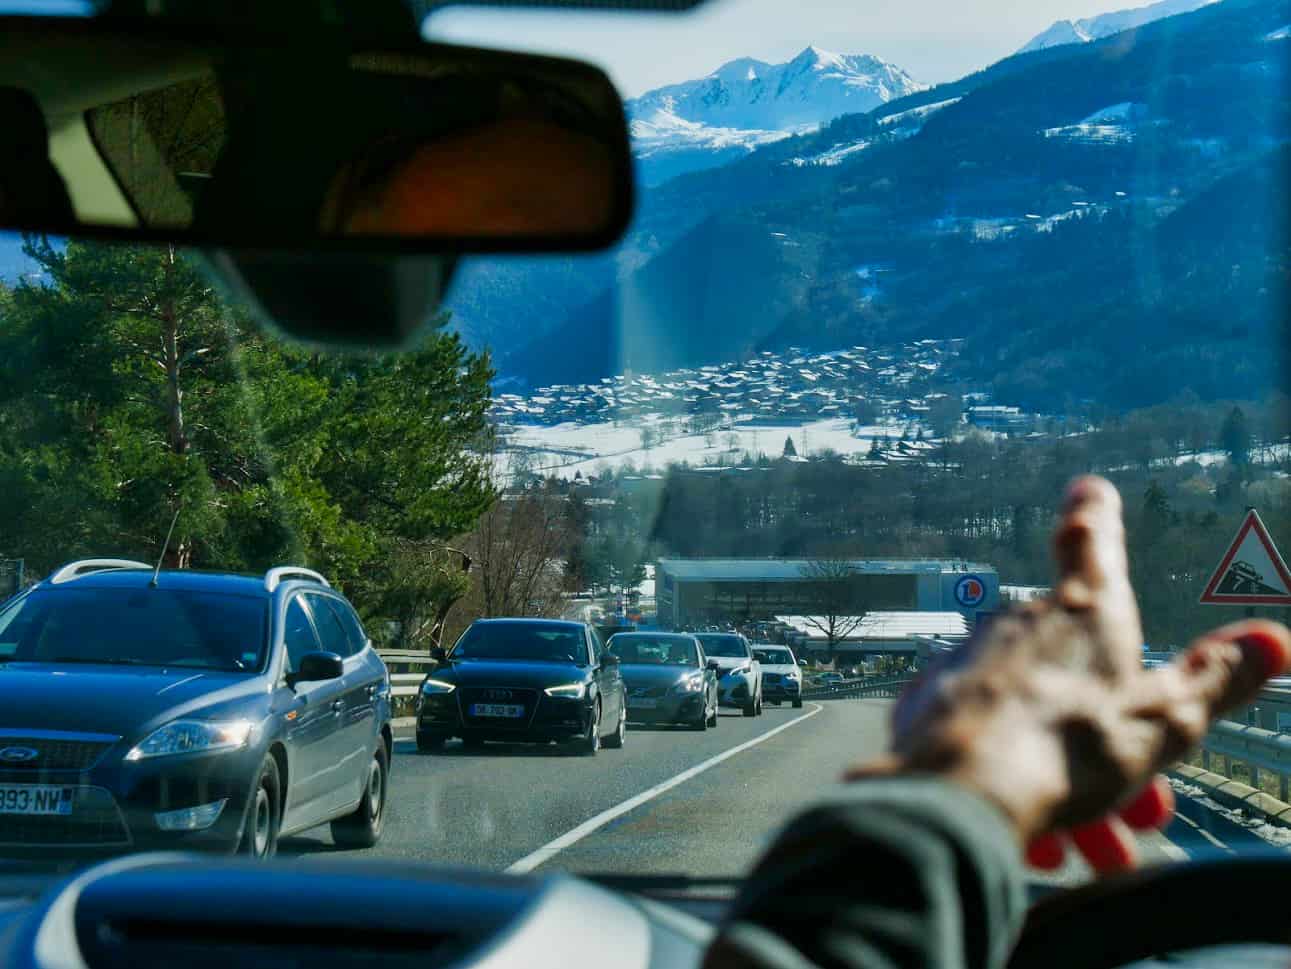 View from inside a car looking out with hand pointing at mountains